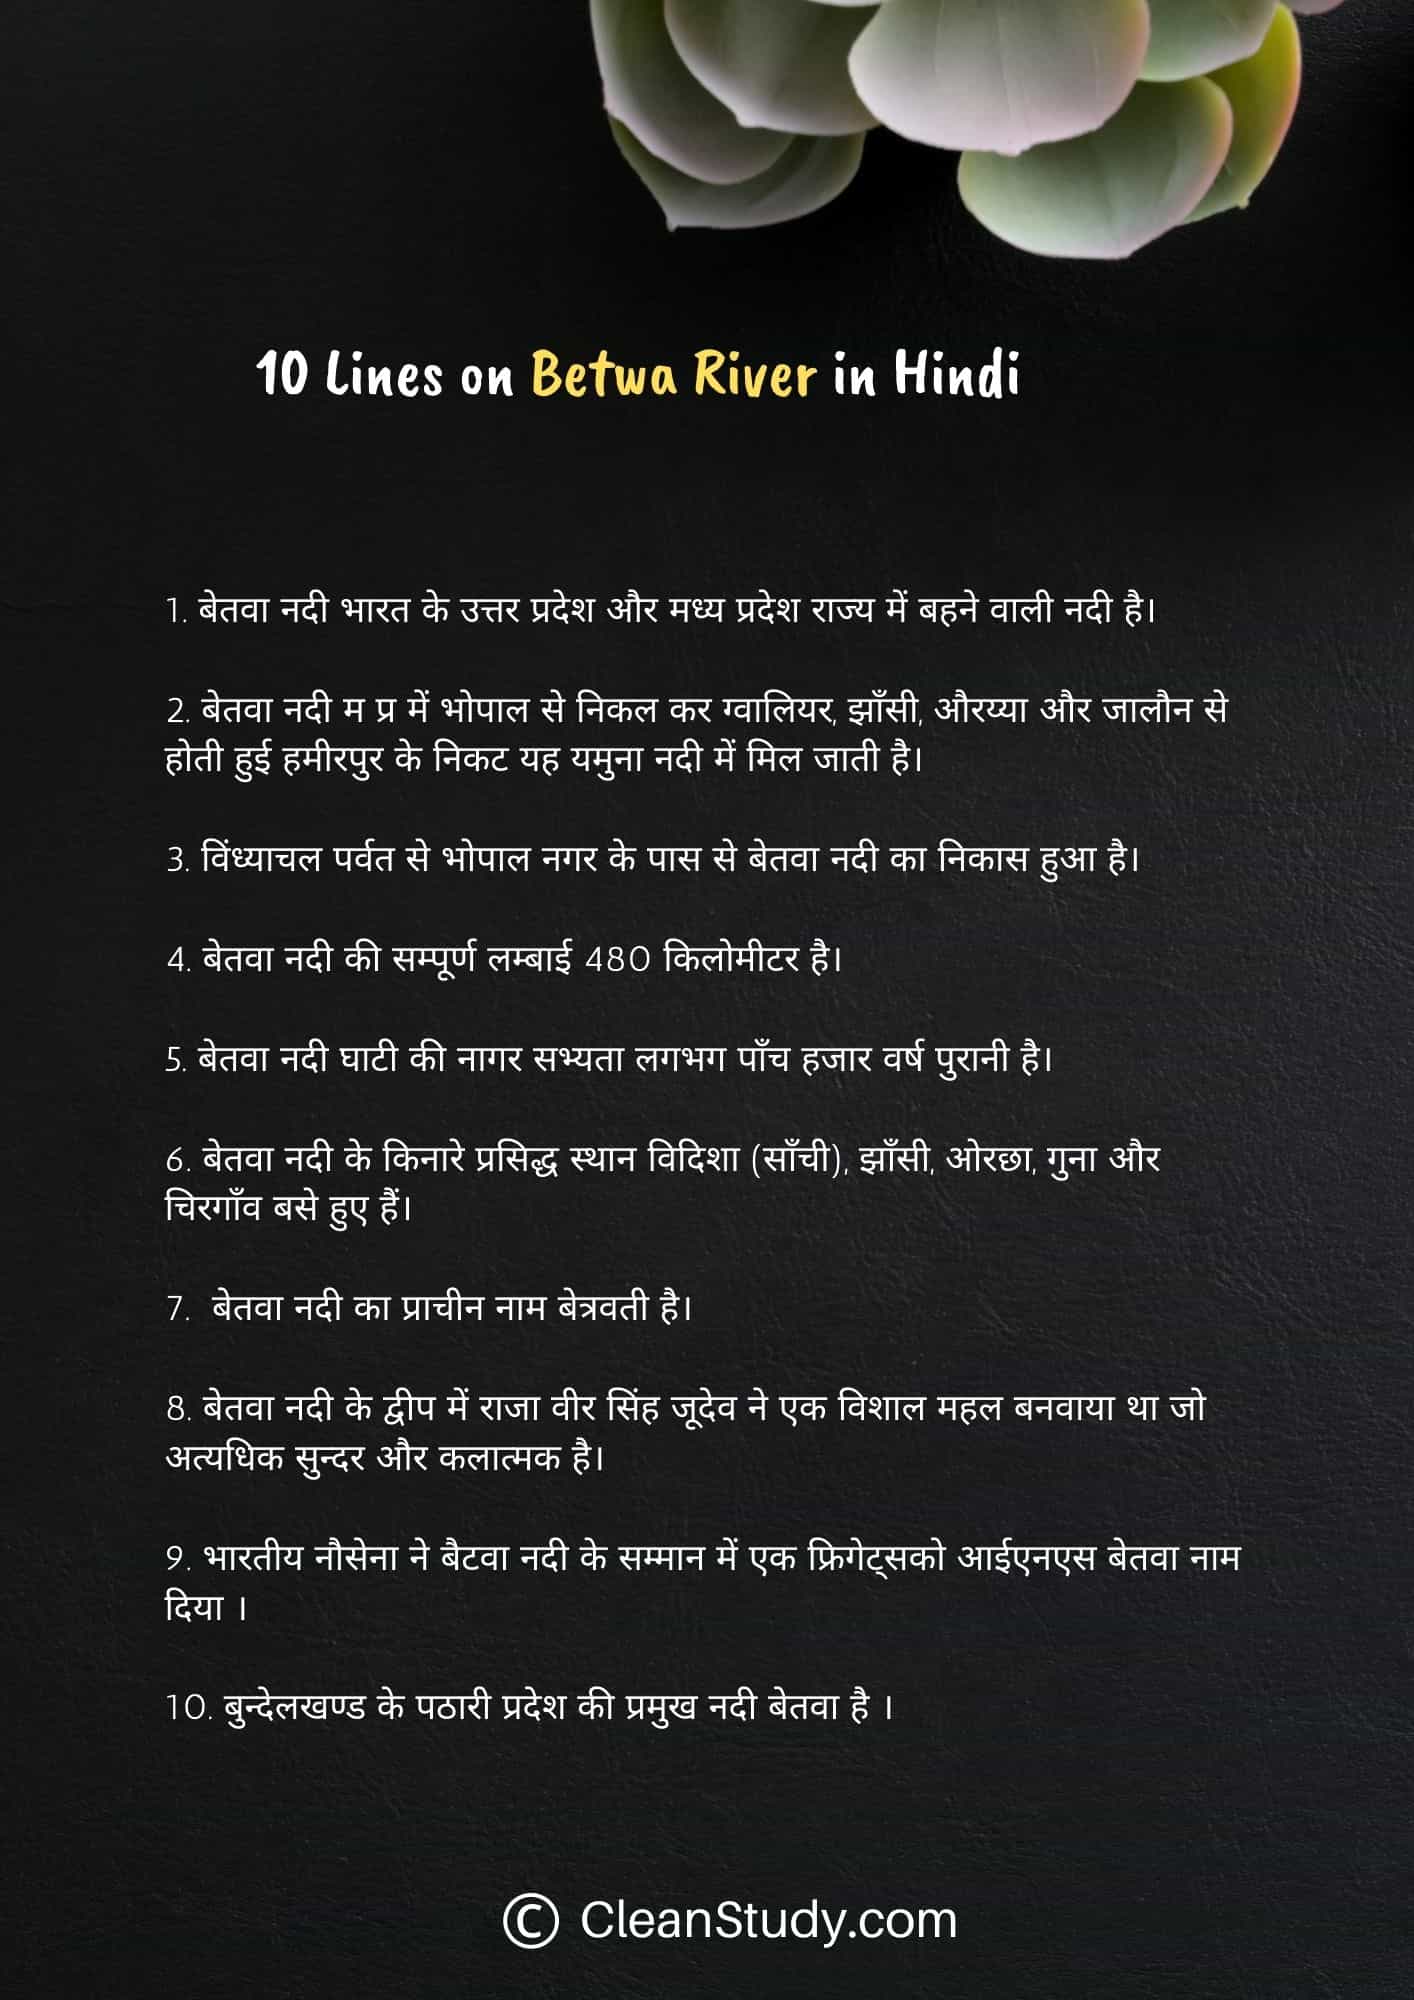 10 Lines on Betwa River in Hindi